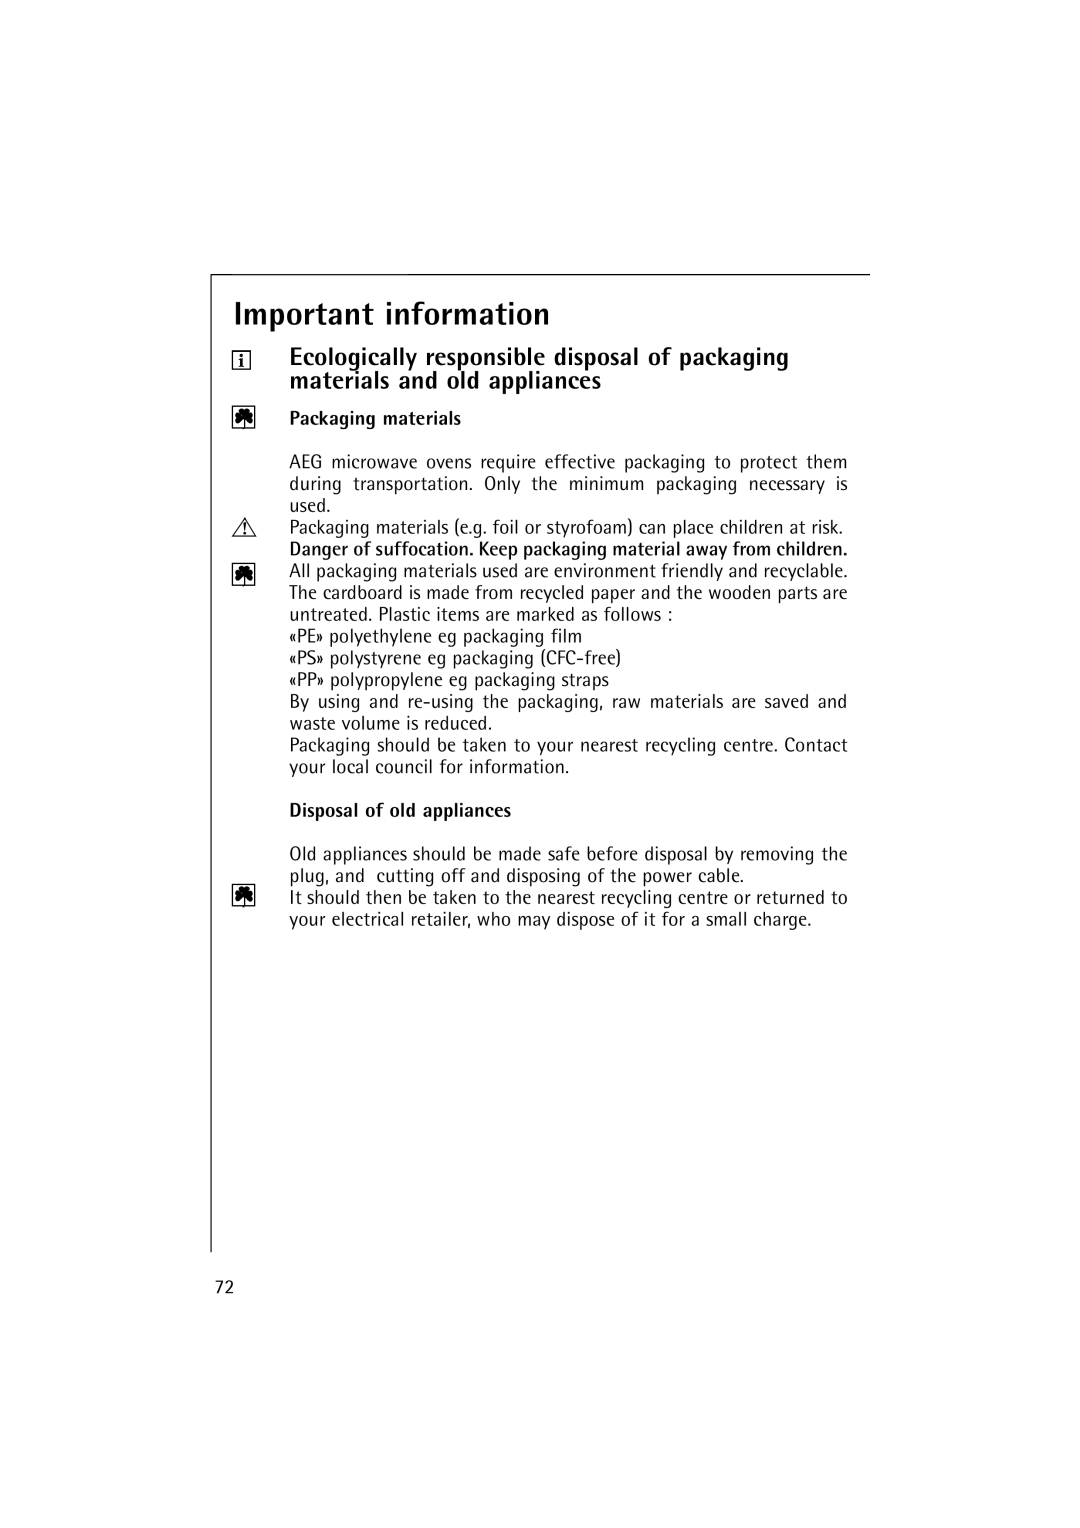 AEG 1231 E manual Important information, Packaging materials, Disposal of old appliances 